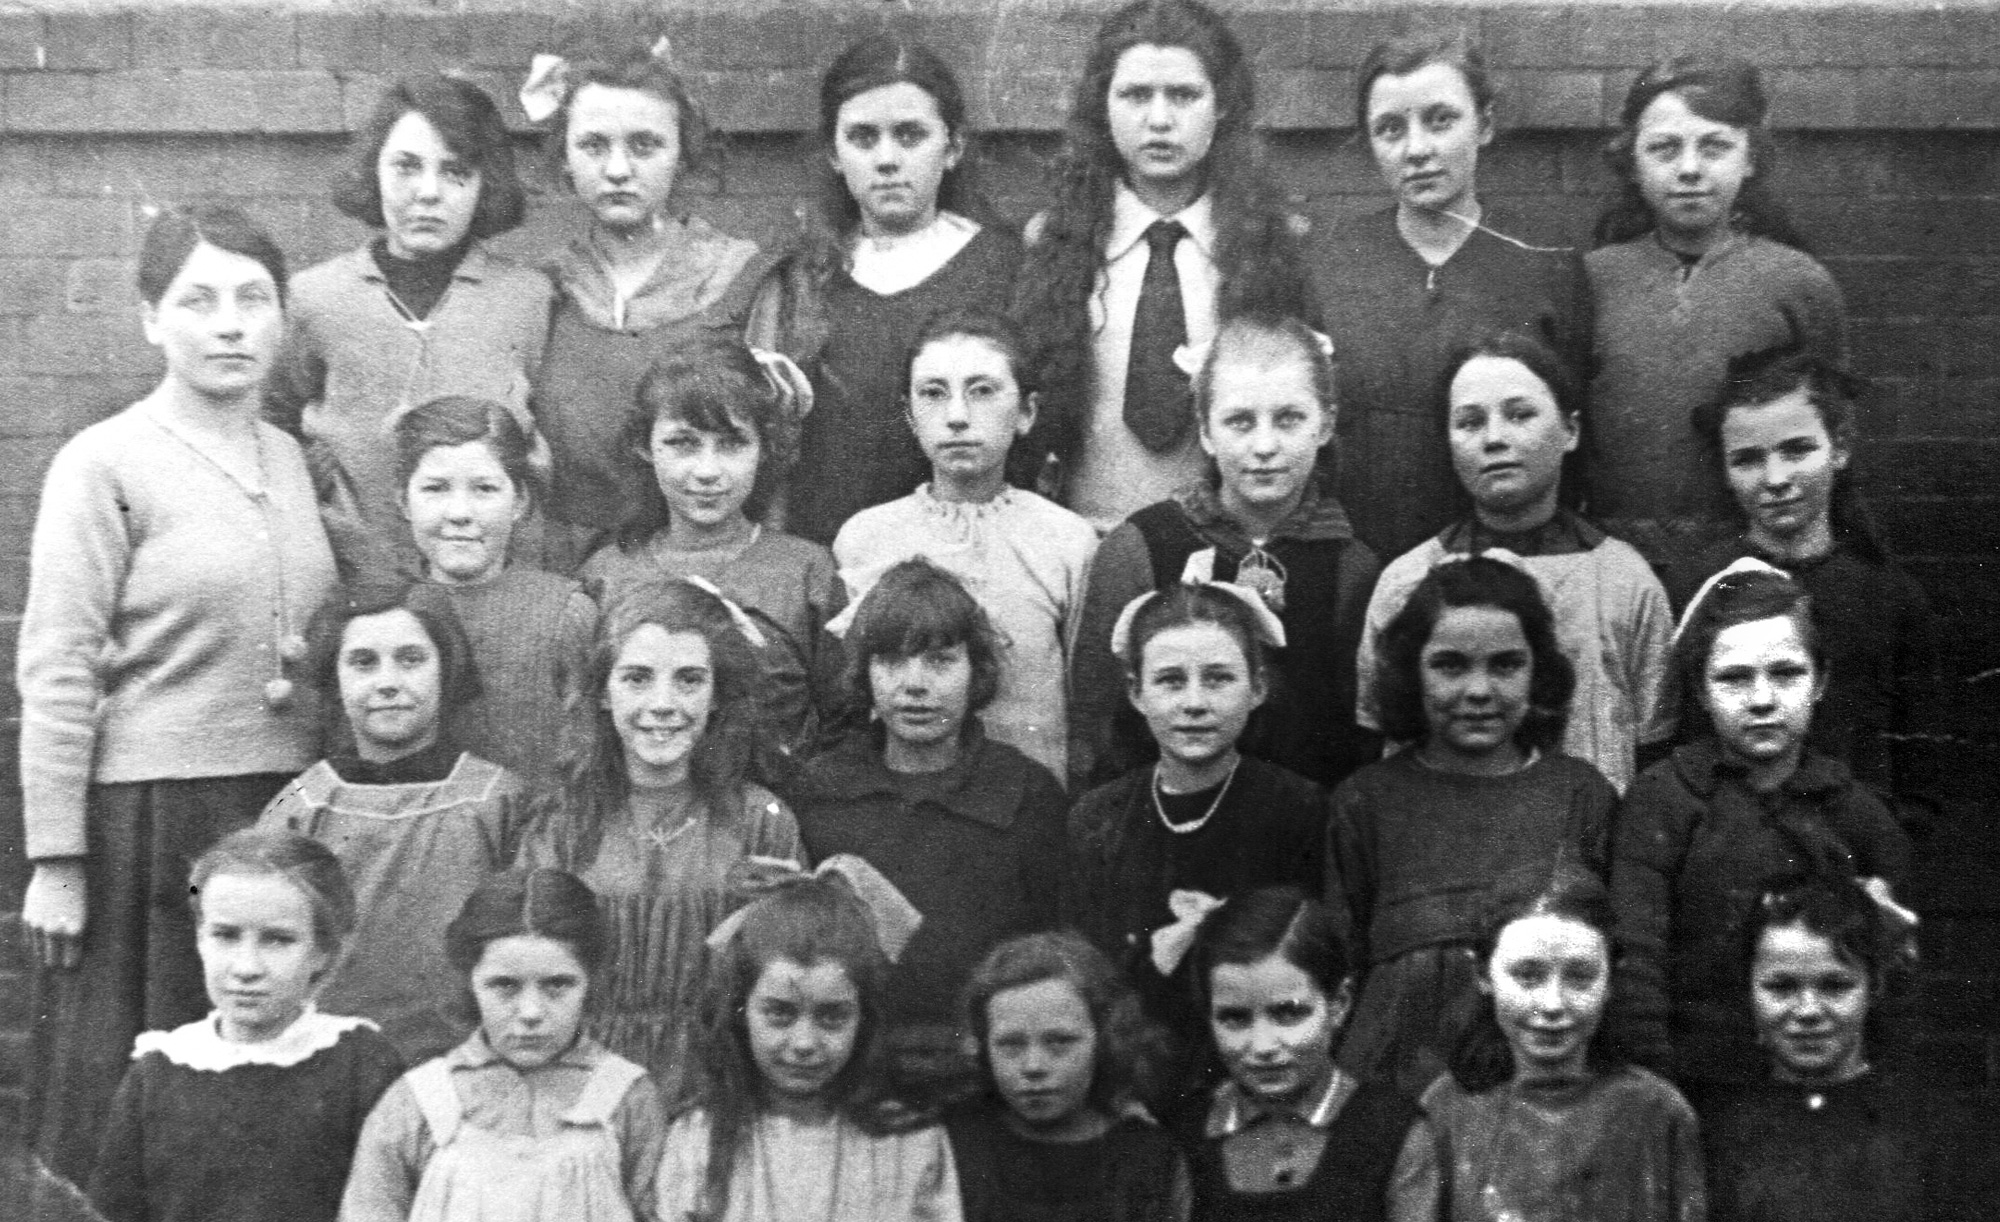 Walbottle Primary class, year unknown